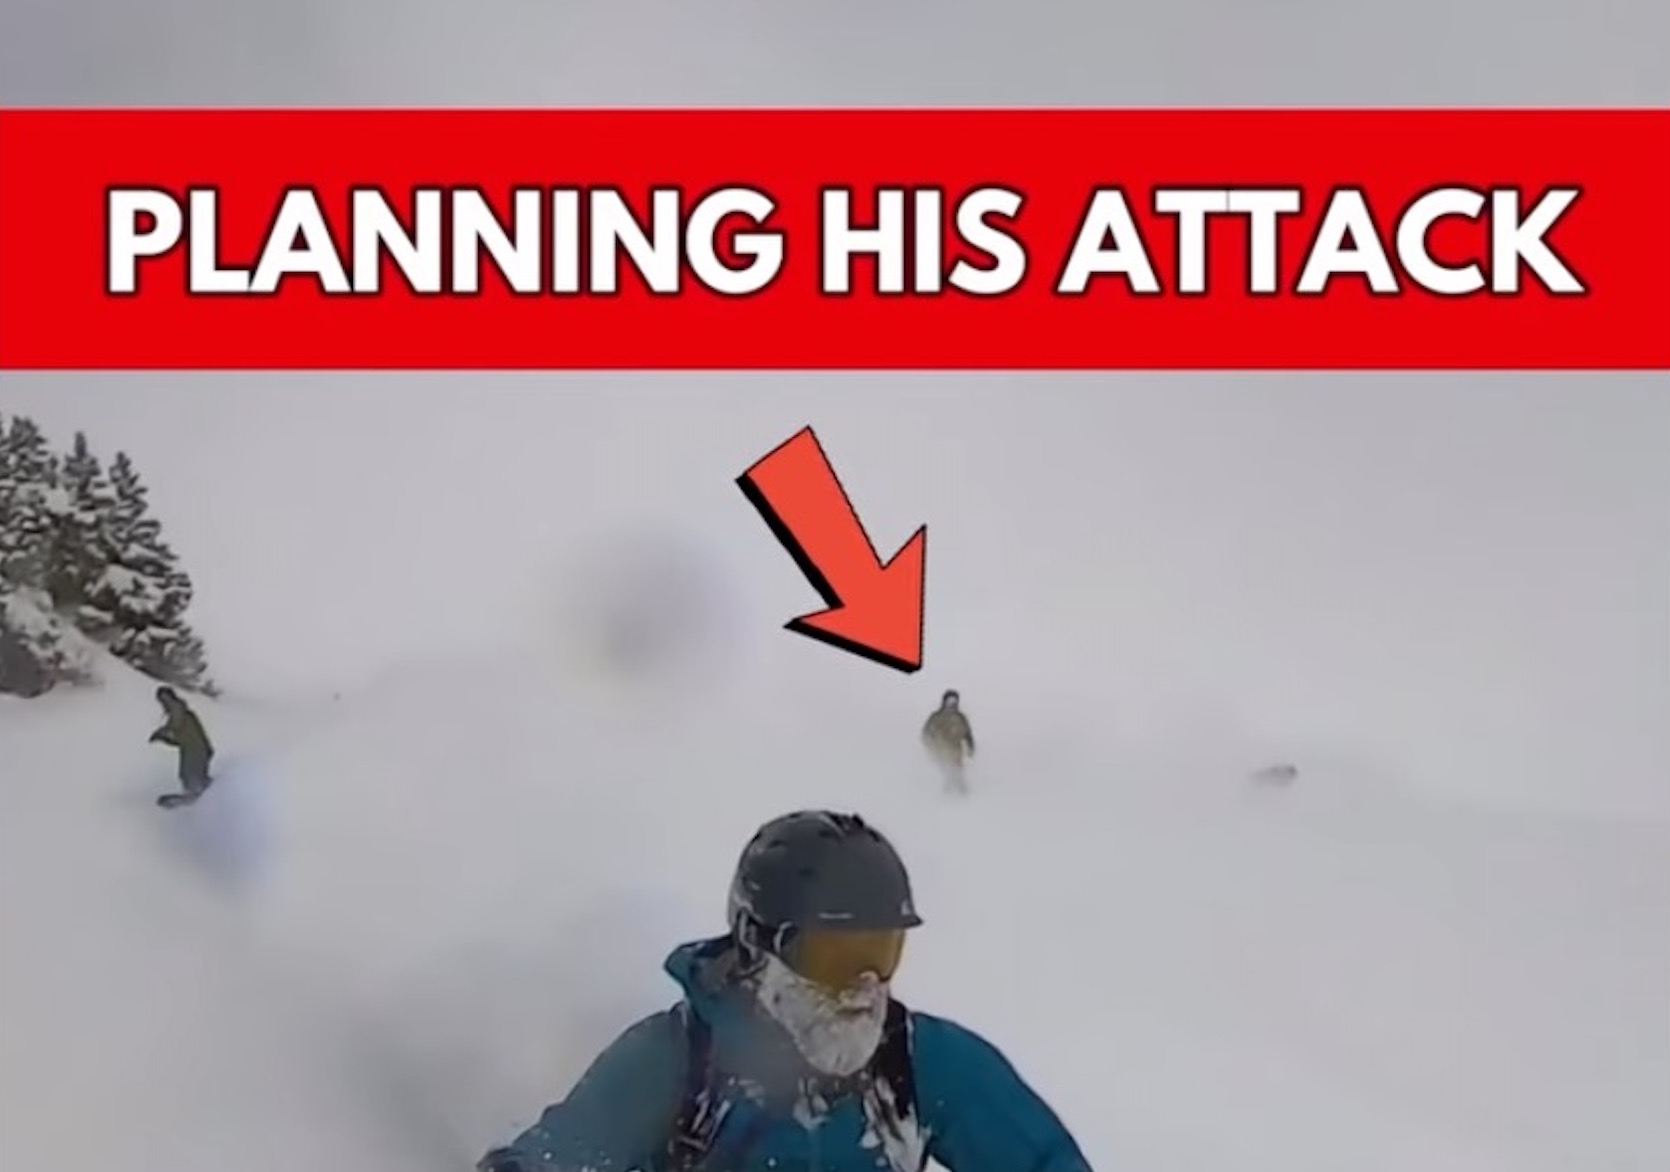 VIDEO: Skier Intentionally Takes Out Snowboarder With Body Check